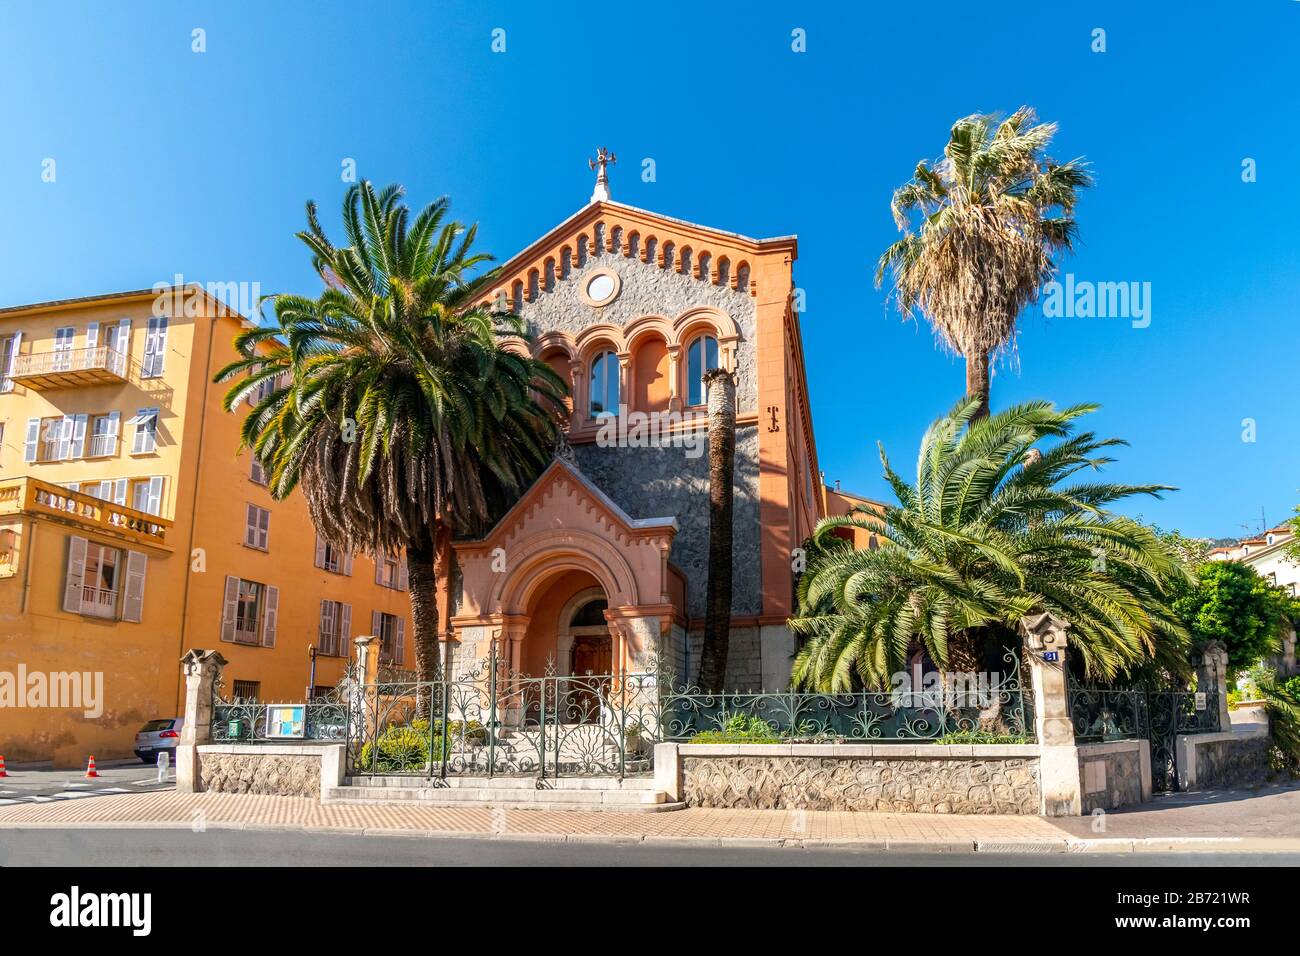 The picturesque Reformed Protestant Church of France surrounded by palm trees in the Mediterranean city of Menton, France. Stock Photo